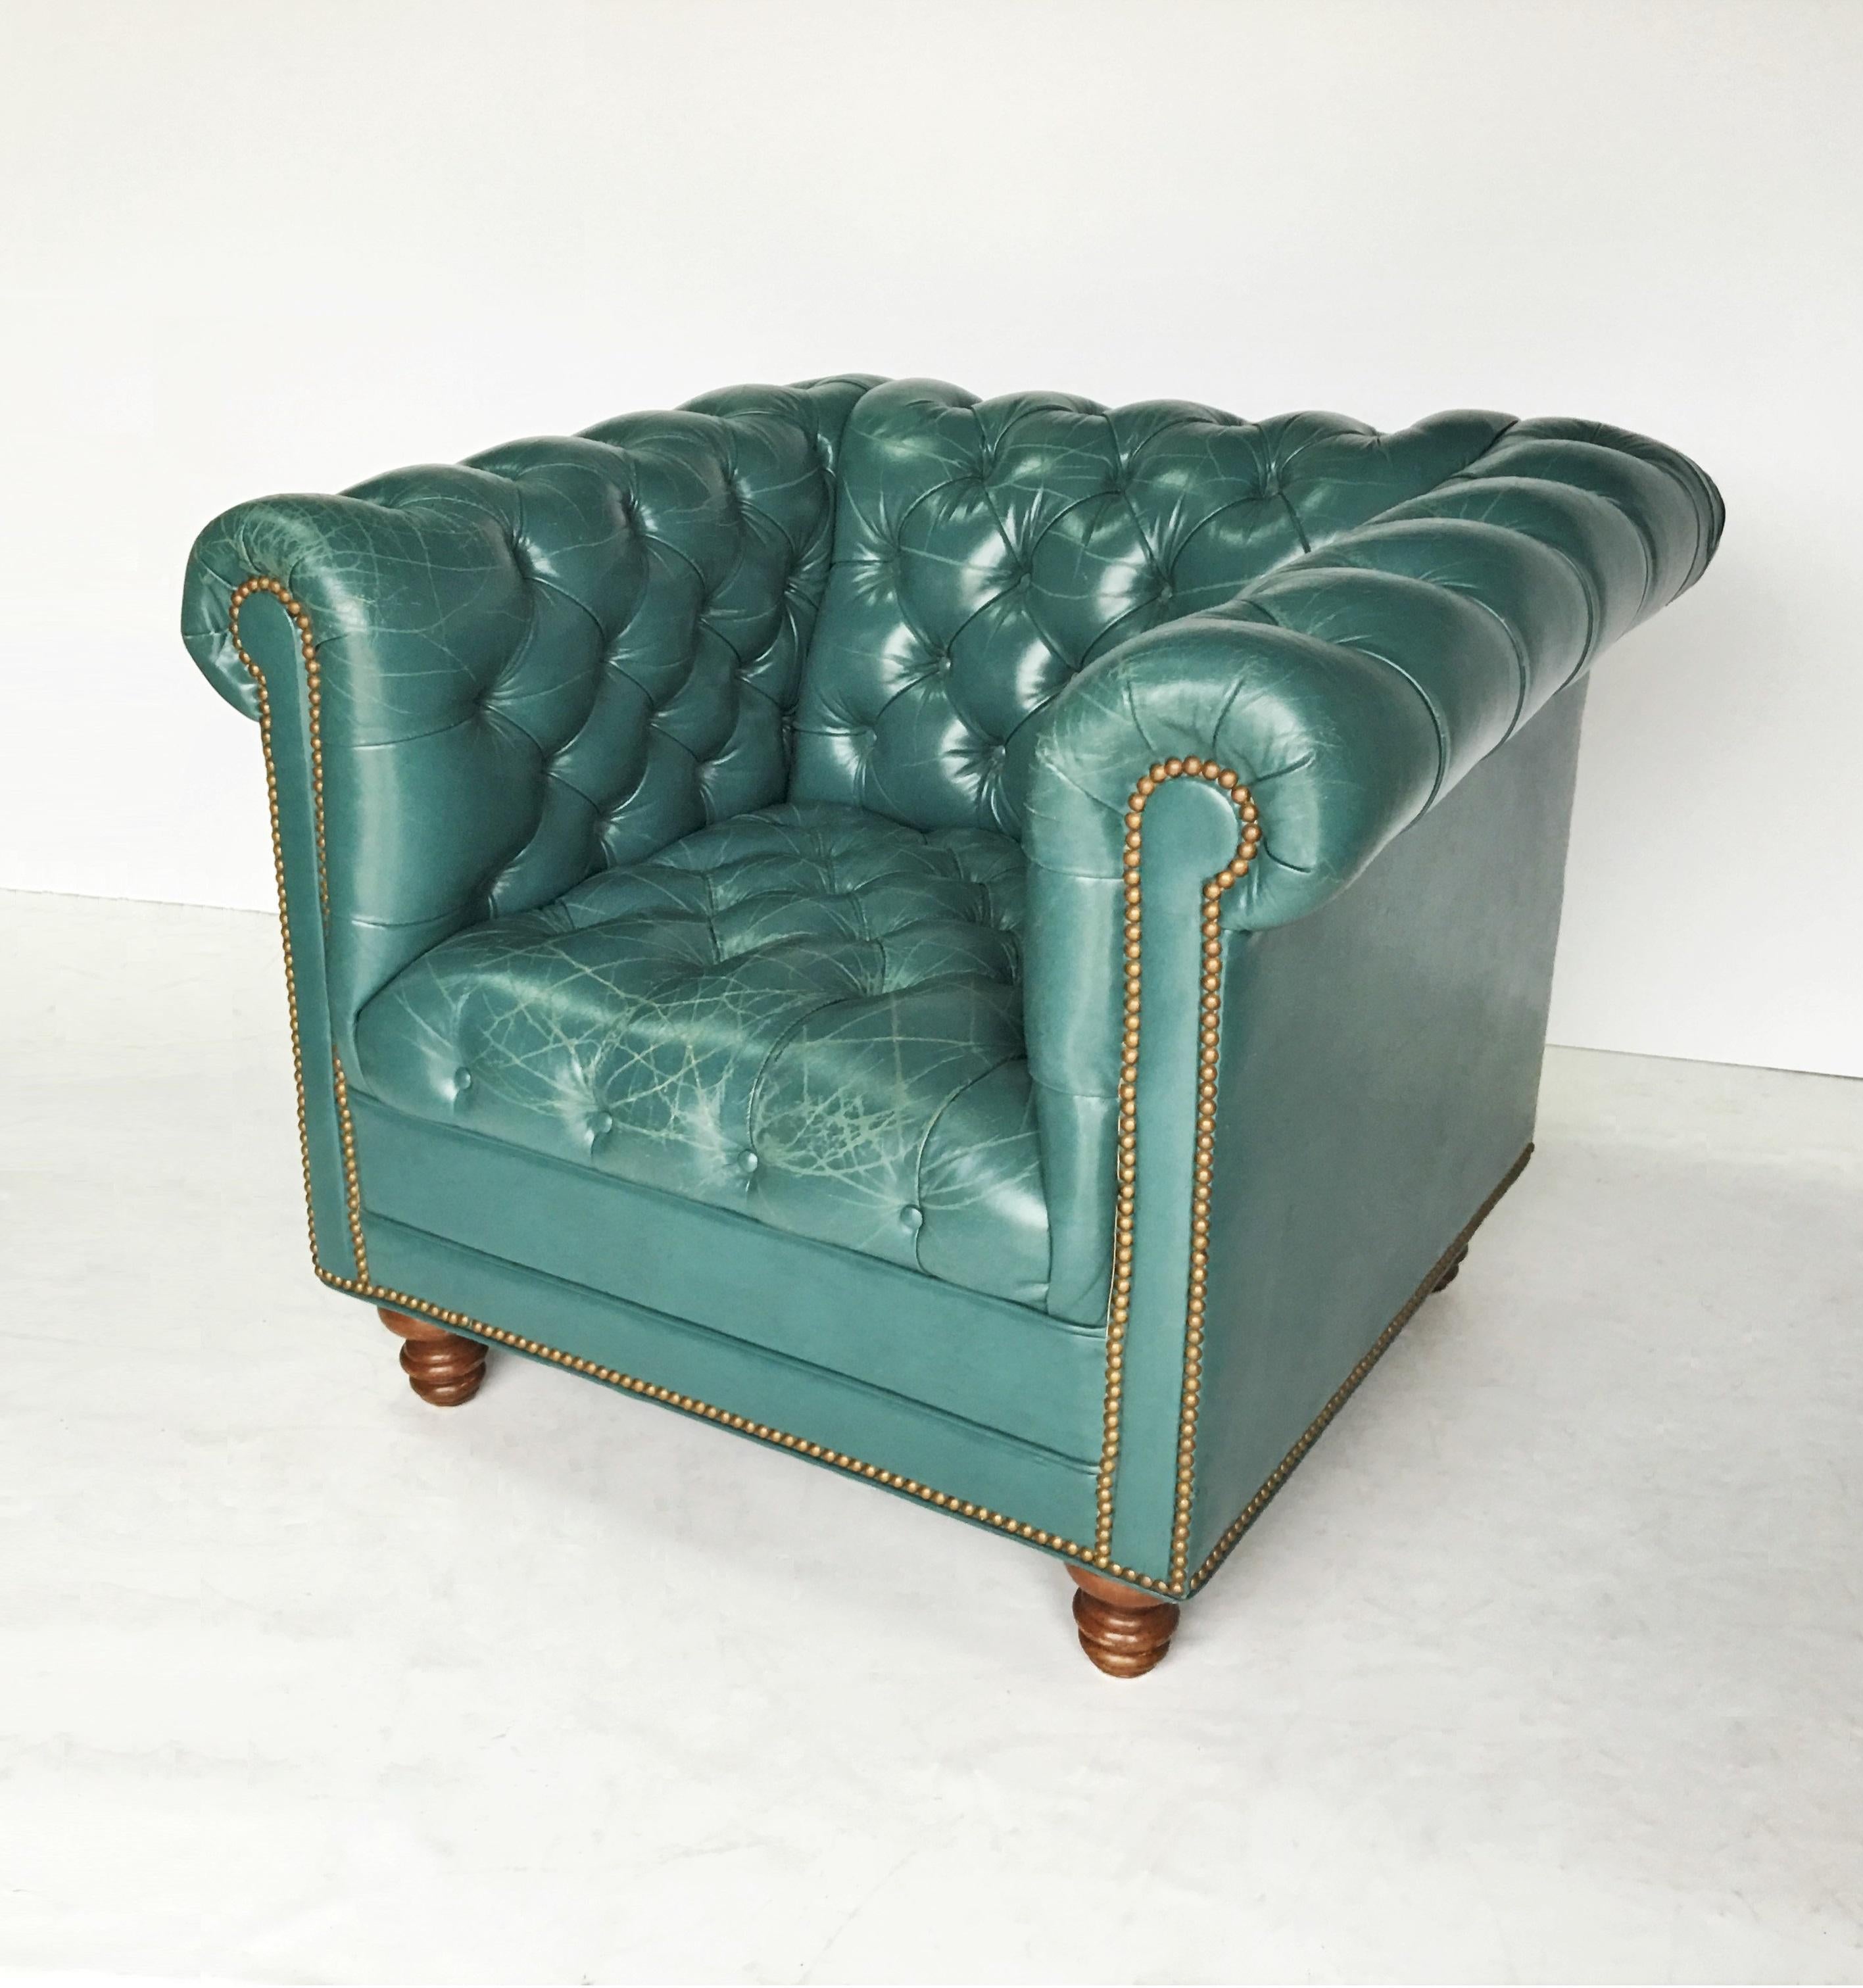 Symbol of elegance and luxury, offered is a pair of vintage Chesterfield club/lounge chairs. Upholstered in a beautifully aged teal, deep tufted buttons and accented with brass nailhead trim. Both chairs raised on solid mahogany bun feet, with